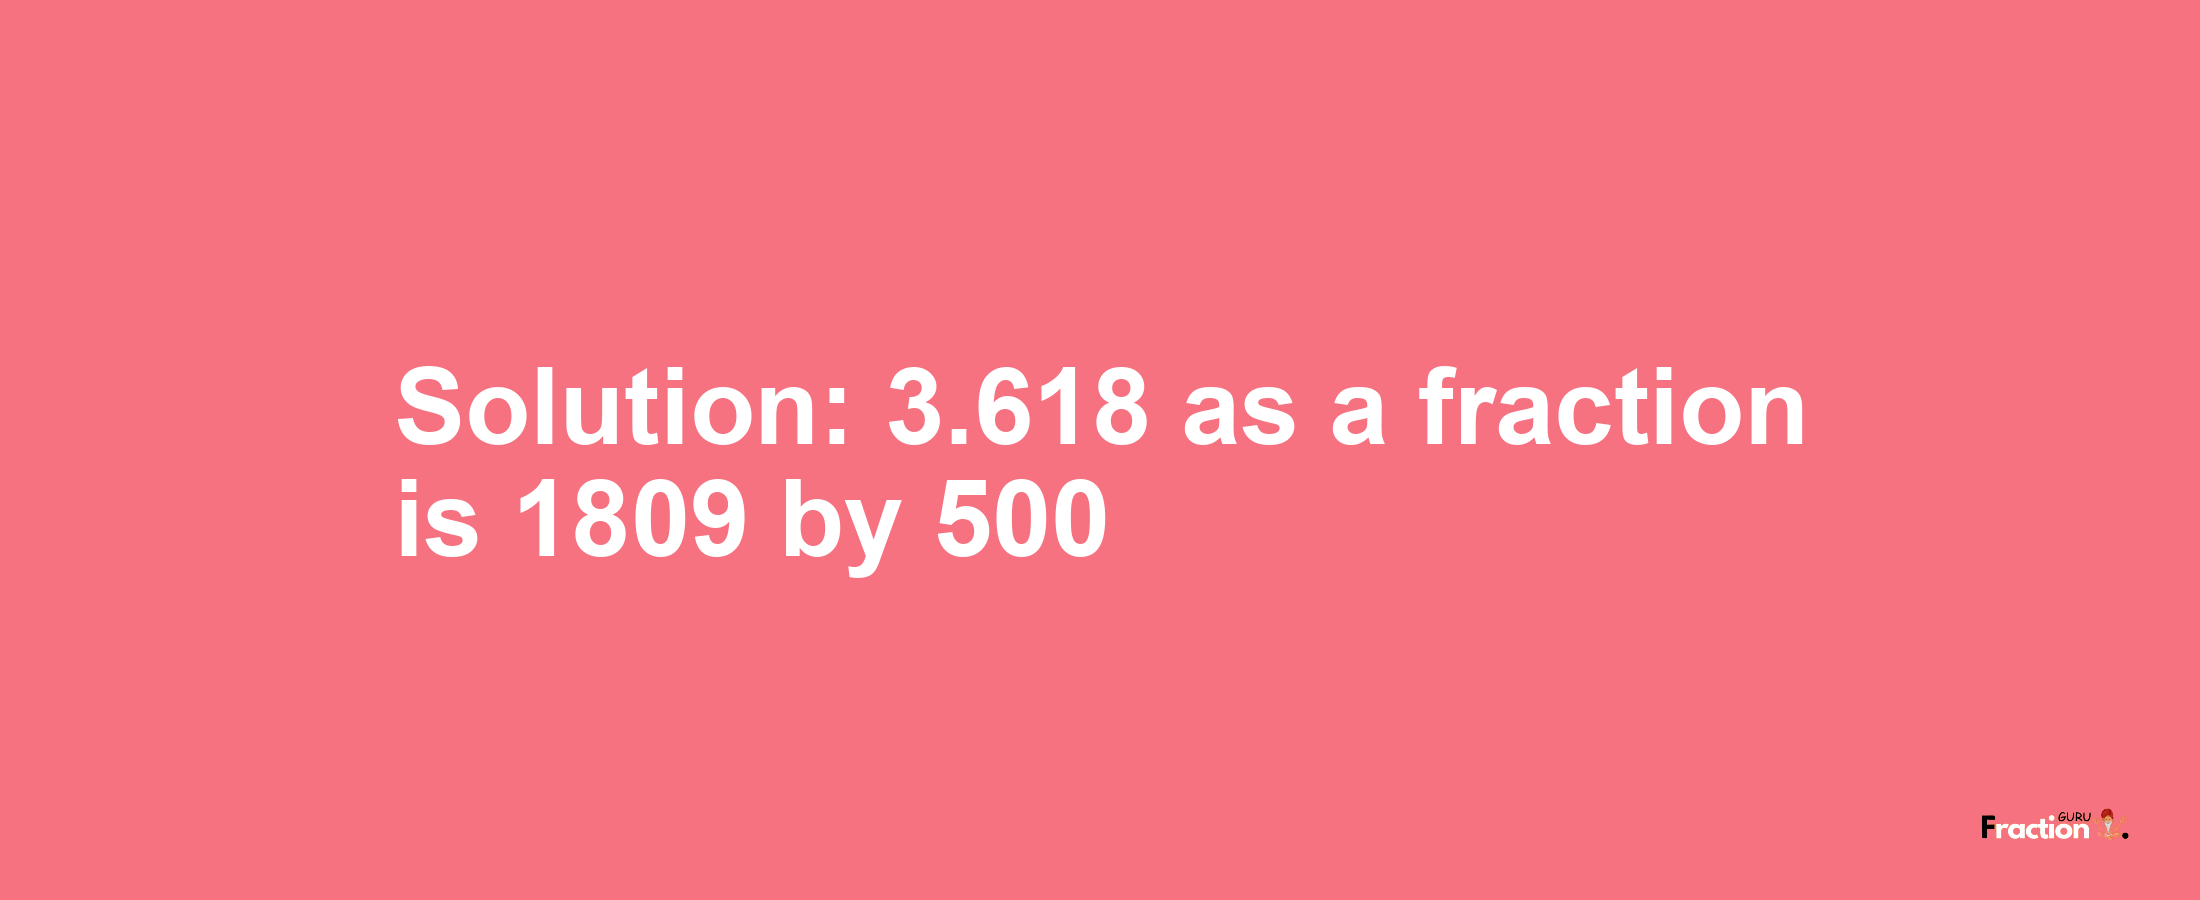 Solution:3.618 as a fraction is 1809/500